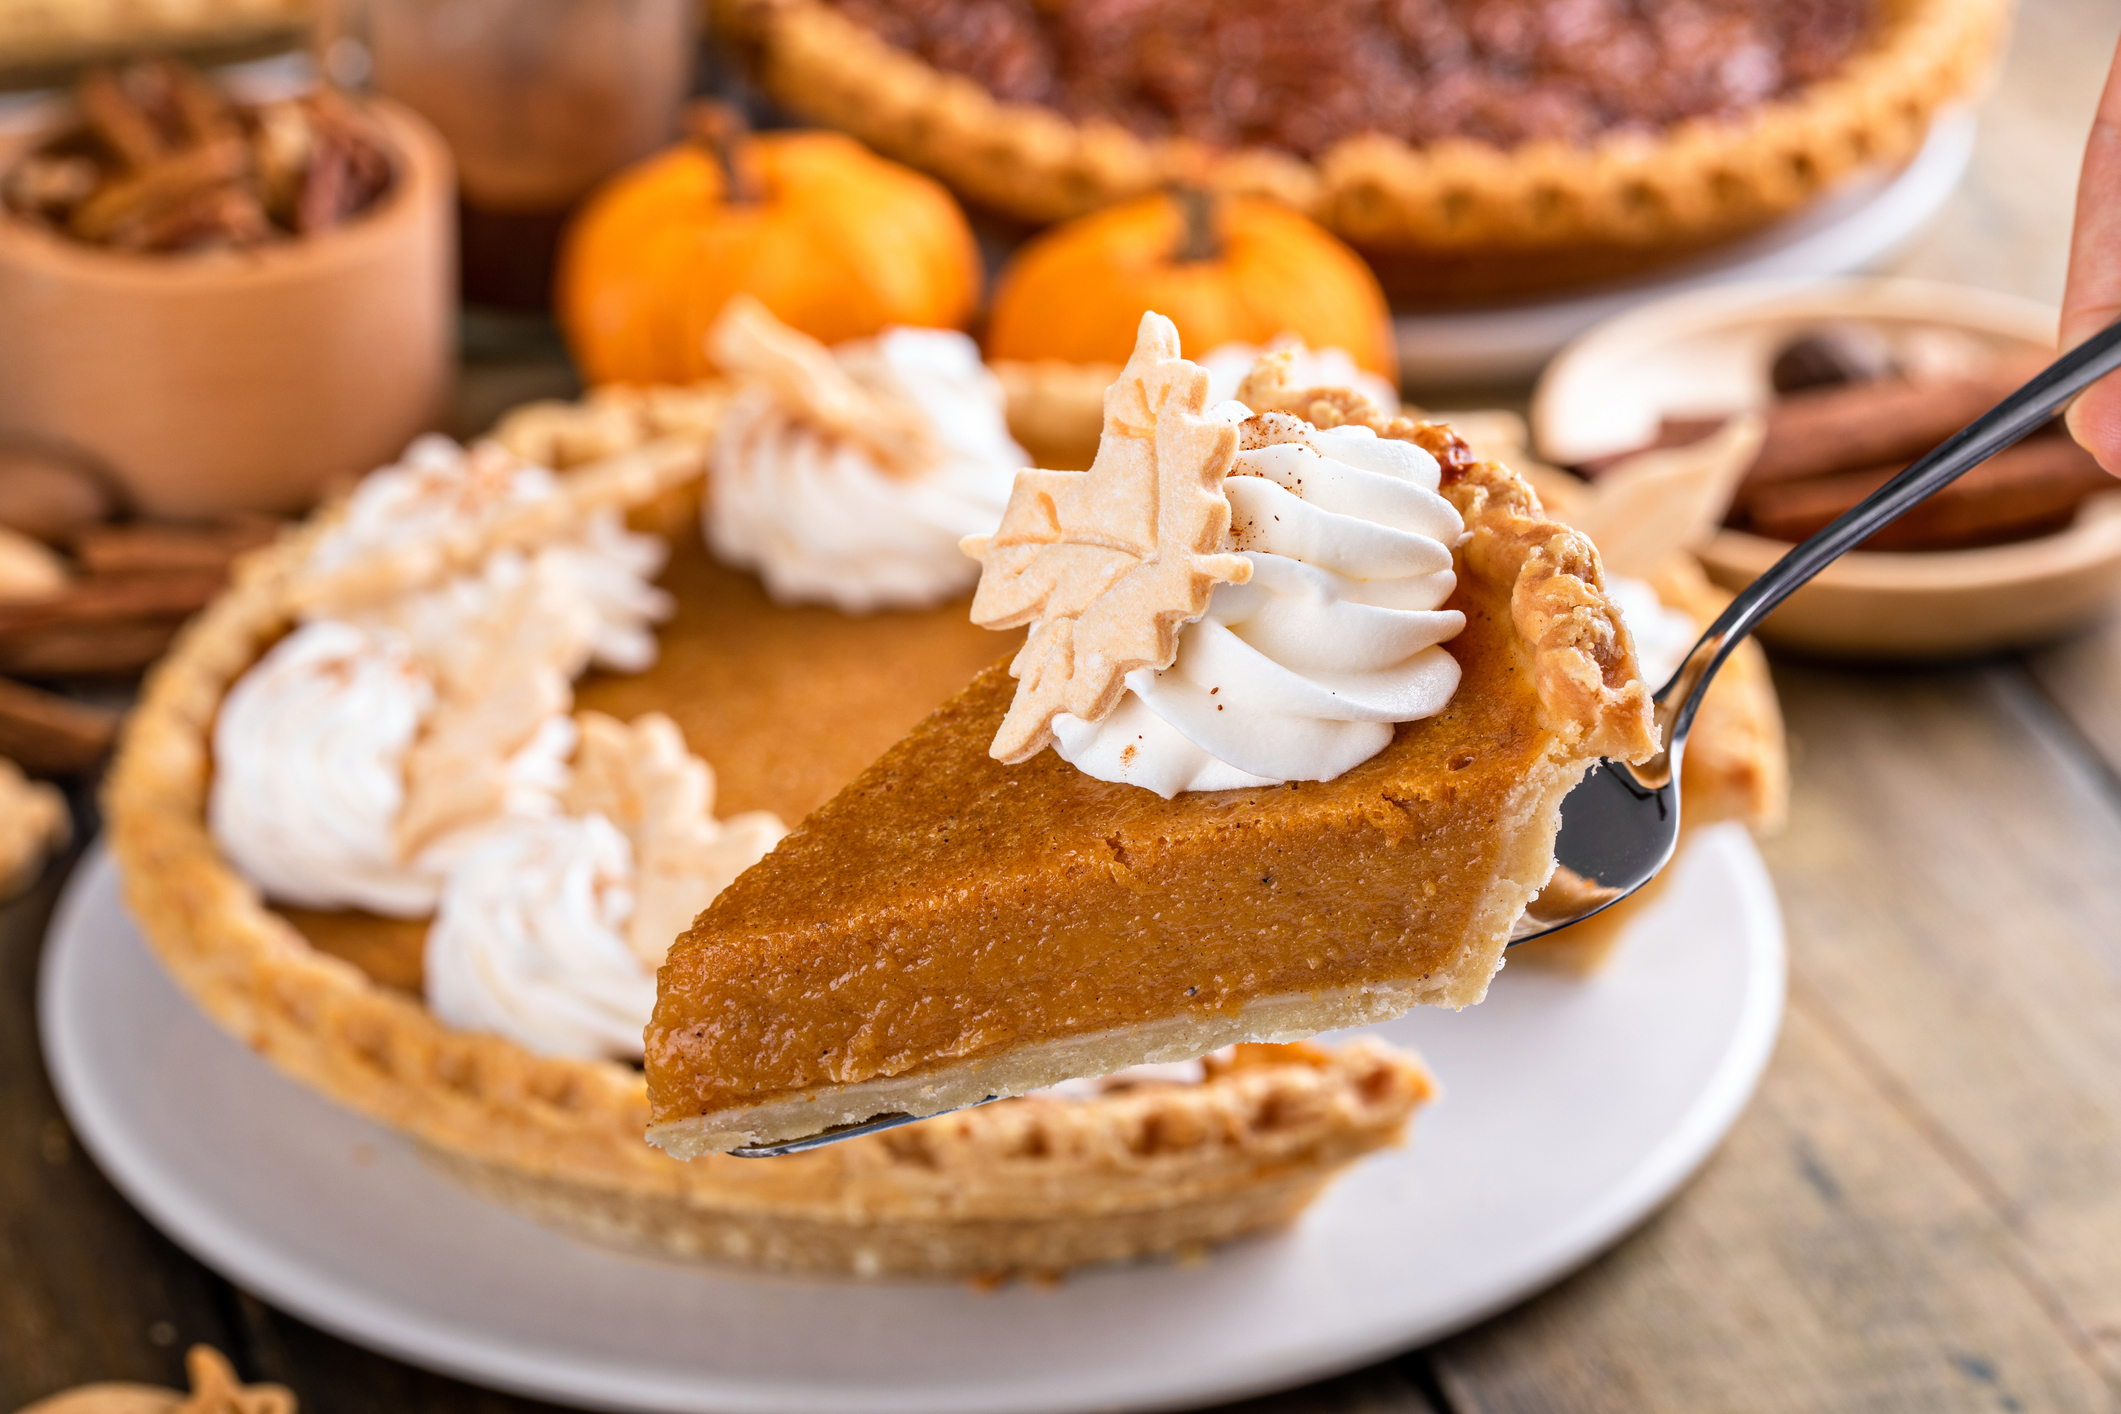 Slice of pumpkin pie with whipped cream on top, traditional fall dessert for Thanksgiving (Photo: iStock - VeselovaElena)